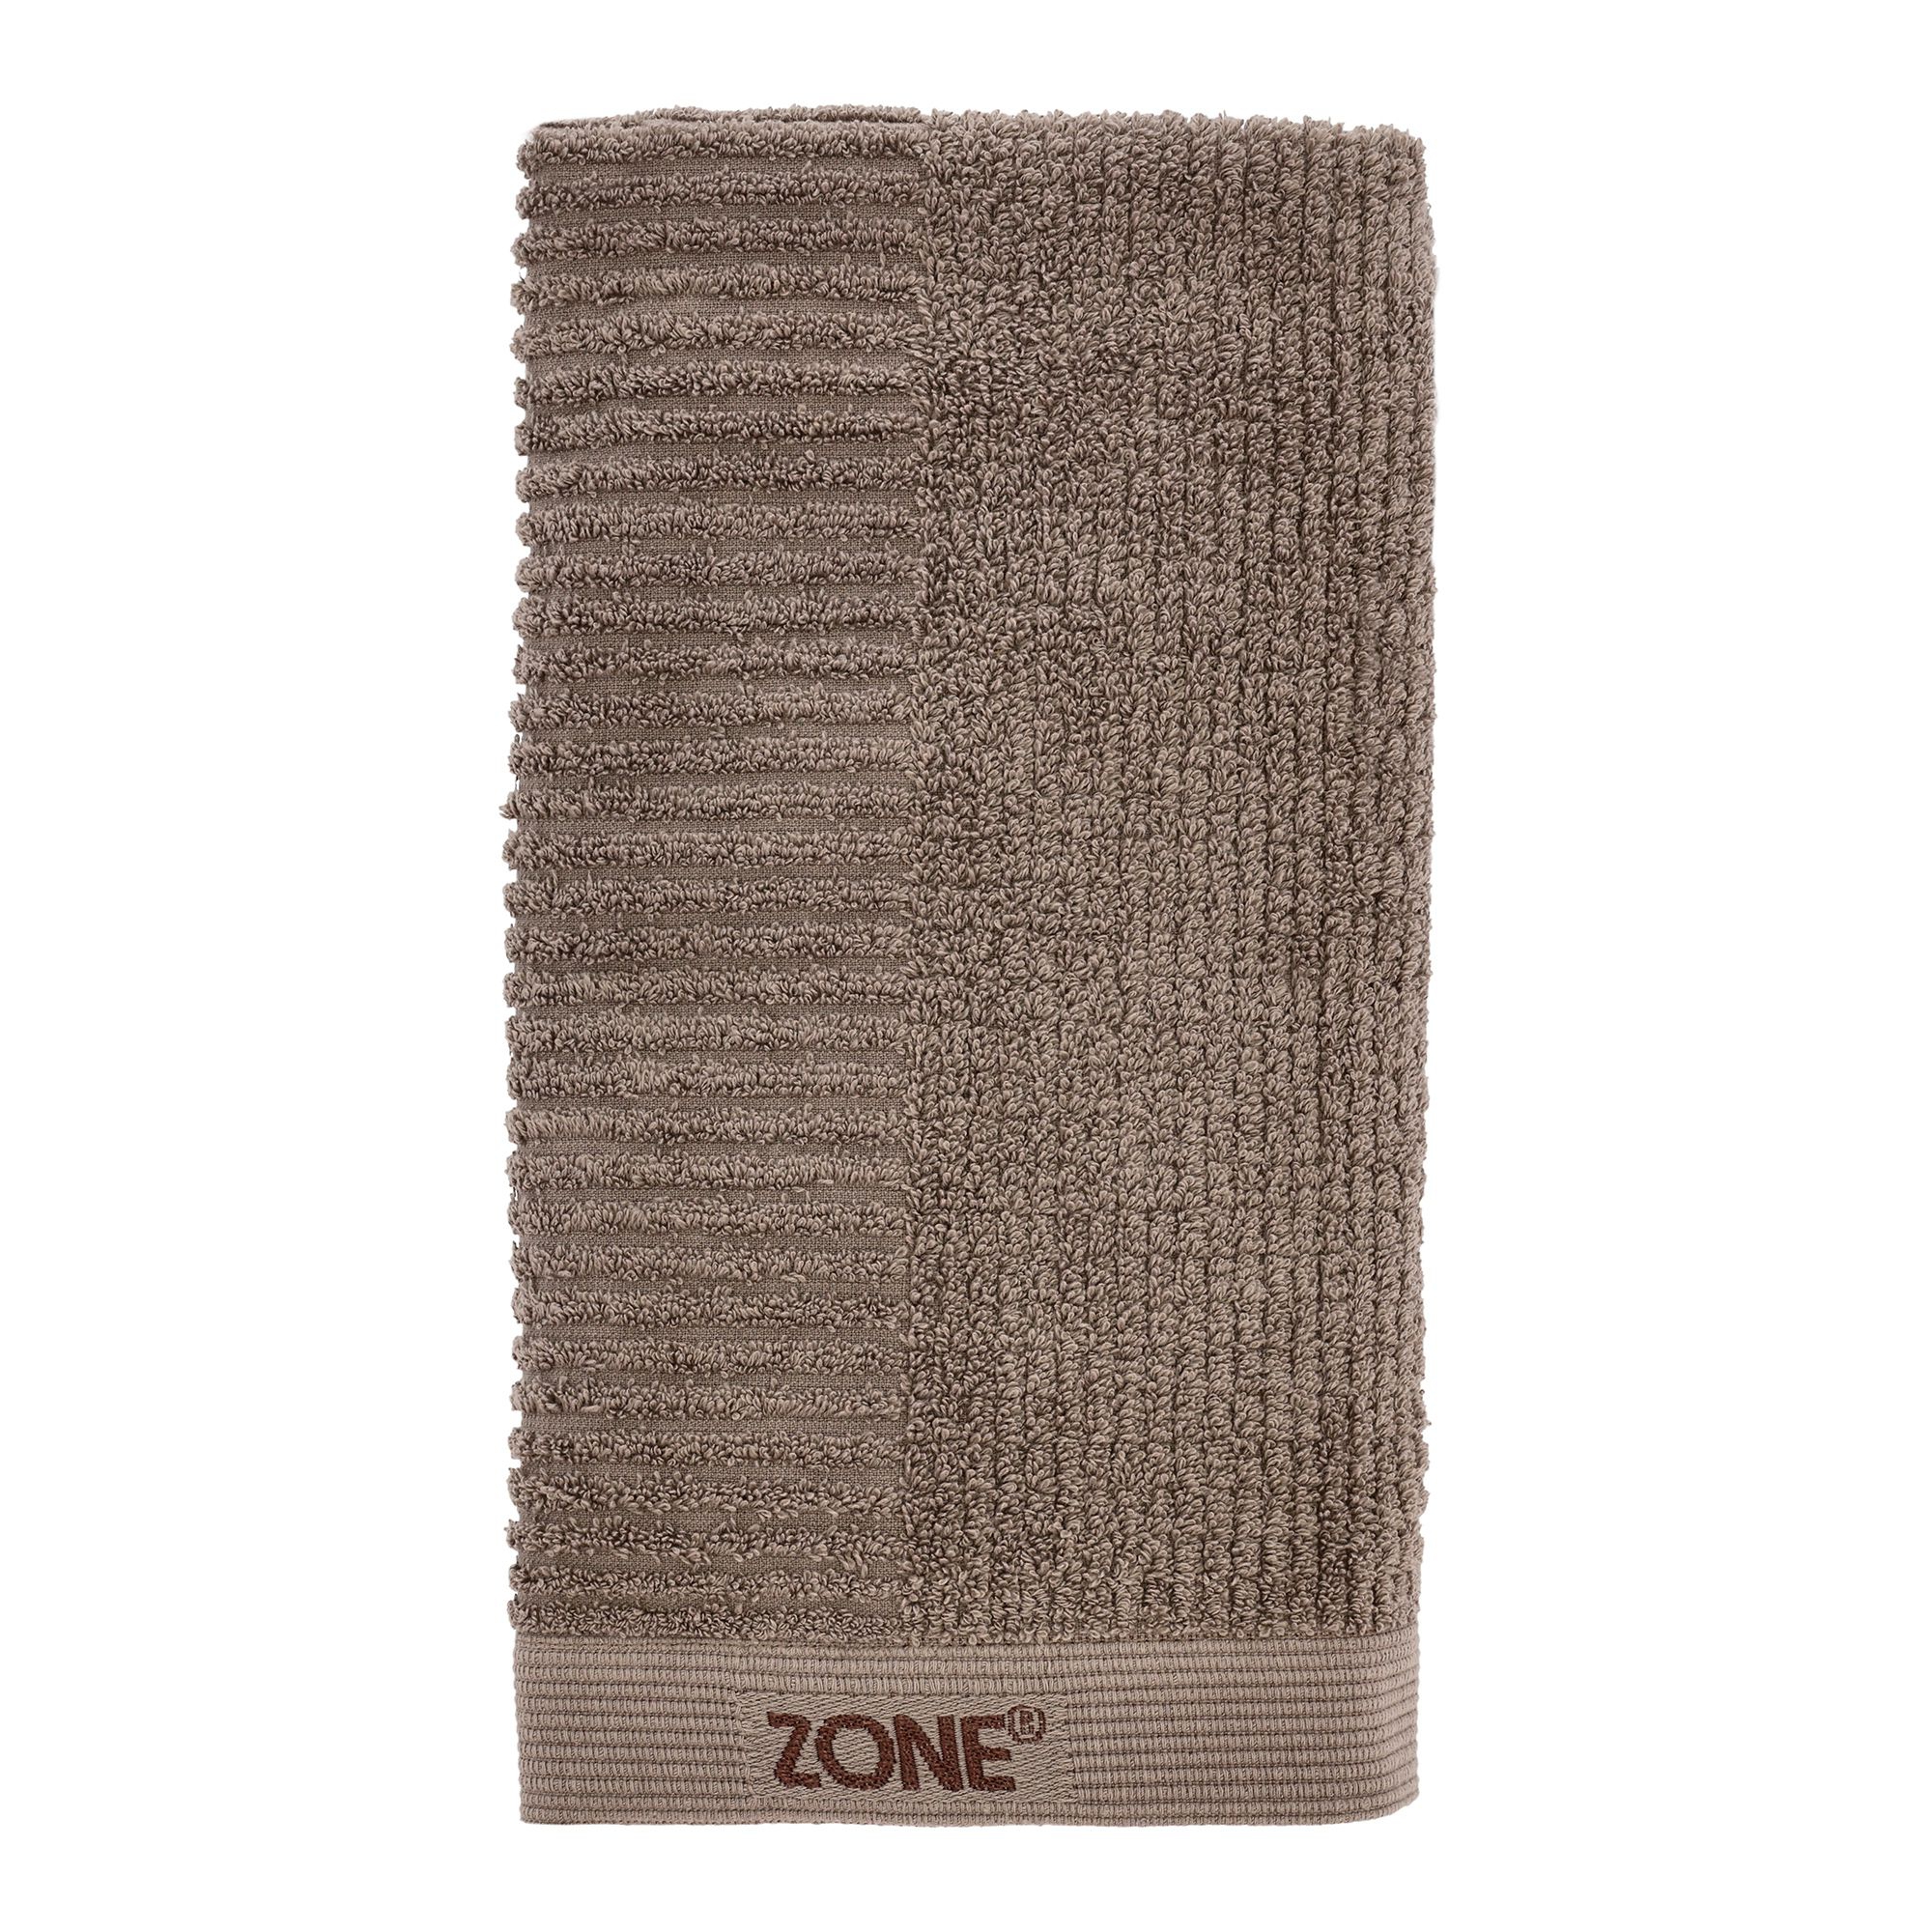 Zone - Classic Handtuch - 50 x 100 cm - Taupe